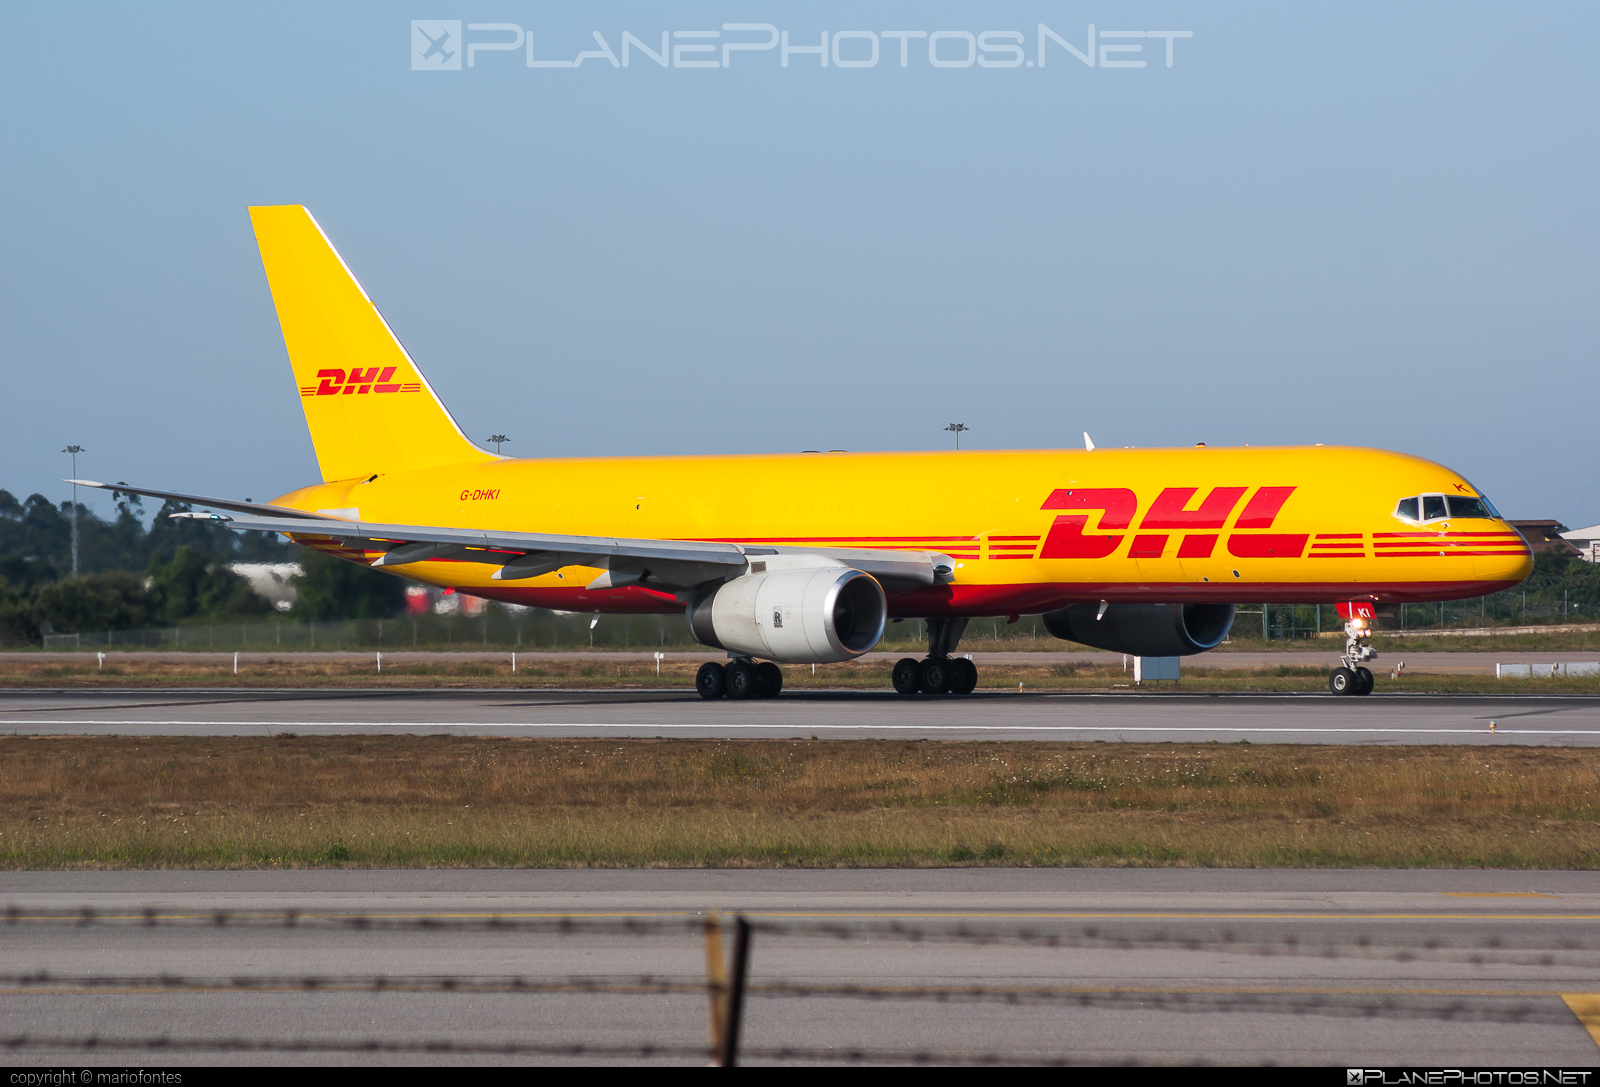 Boeing 757-200PCF - G-DHKI operated by DHL (European Air Transport) #EuropeanAirTransport #b757 #b757200pcf #b757pcf #boeing #boeing757 #boeing757200pcf #boeing757pcf #dhl